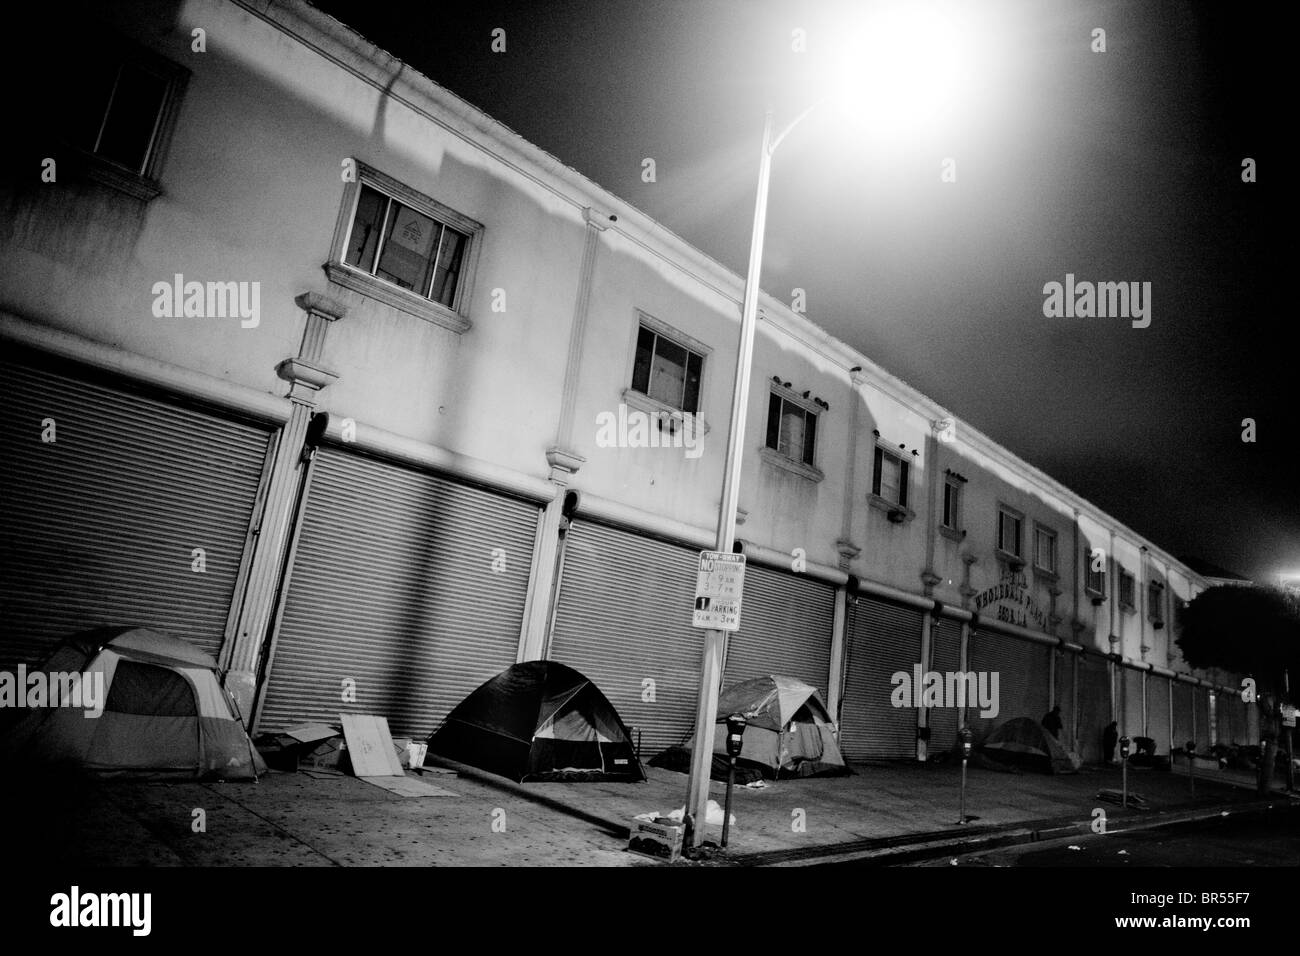 Homeless in the Skid Row area of Los Angeles California. Stock Photo